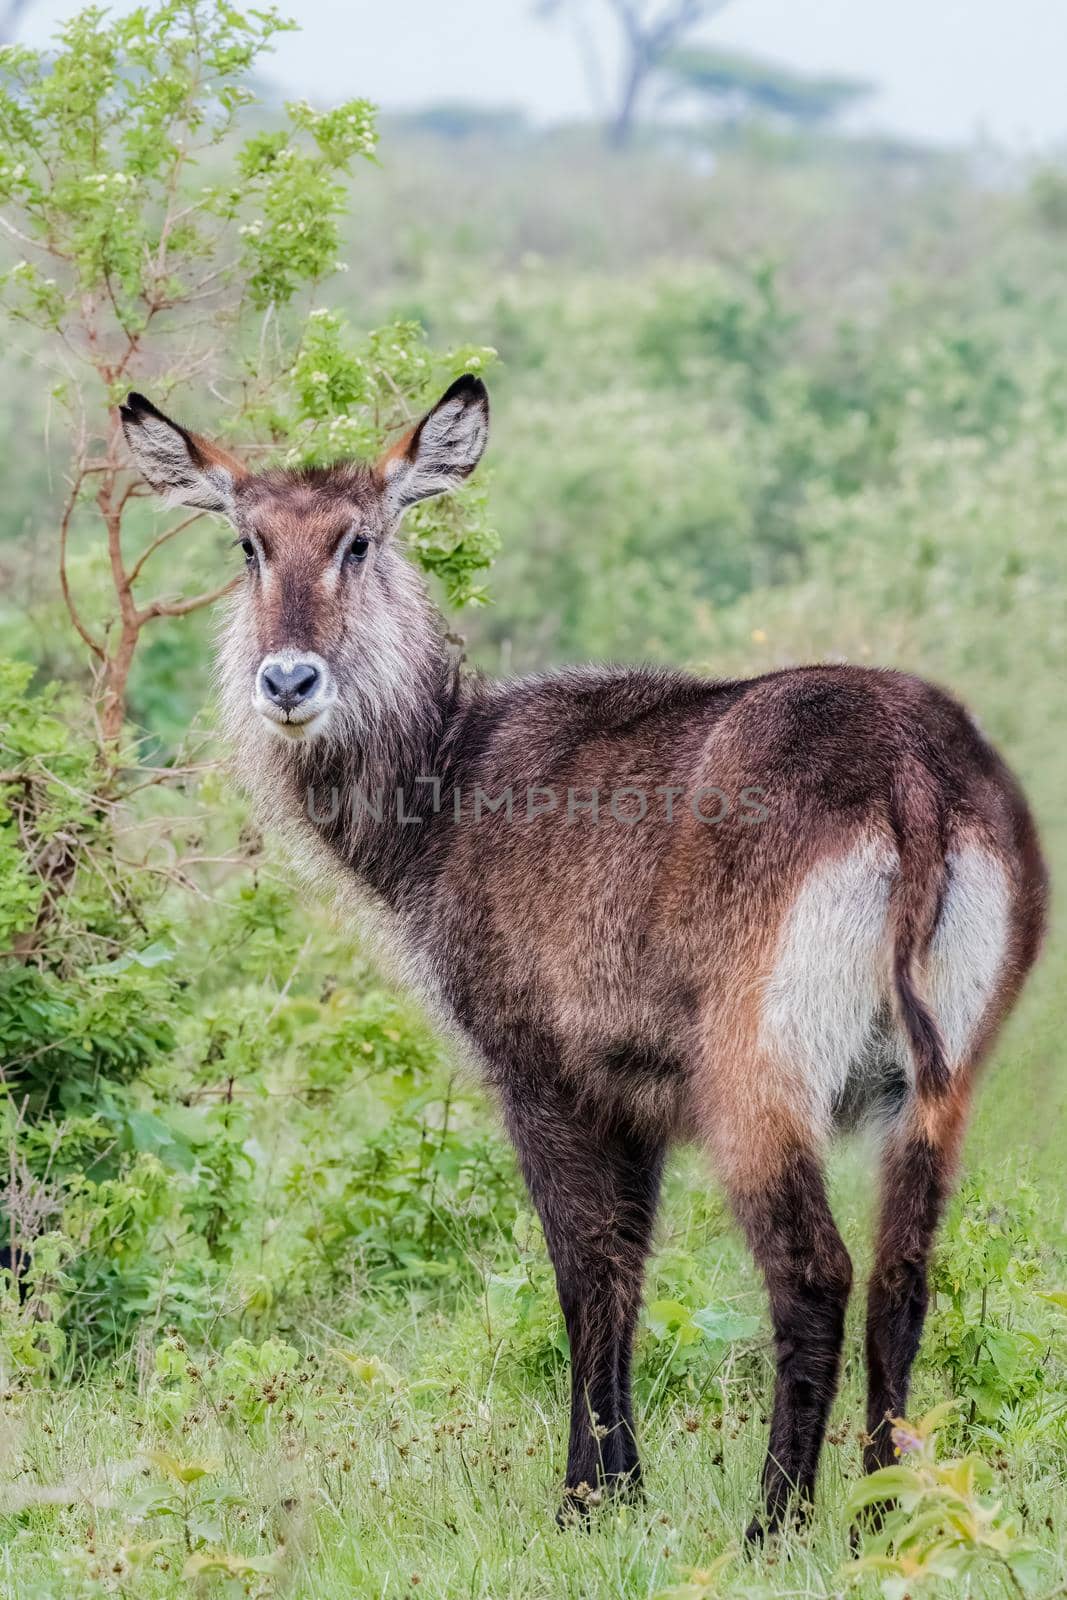 WaterBuck is a large antelope from Africa by Rajh_Photography